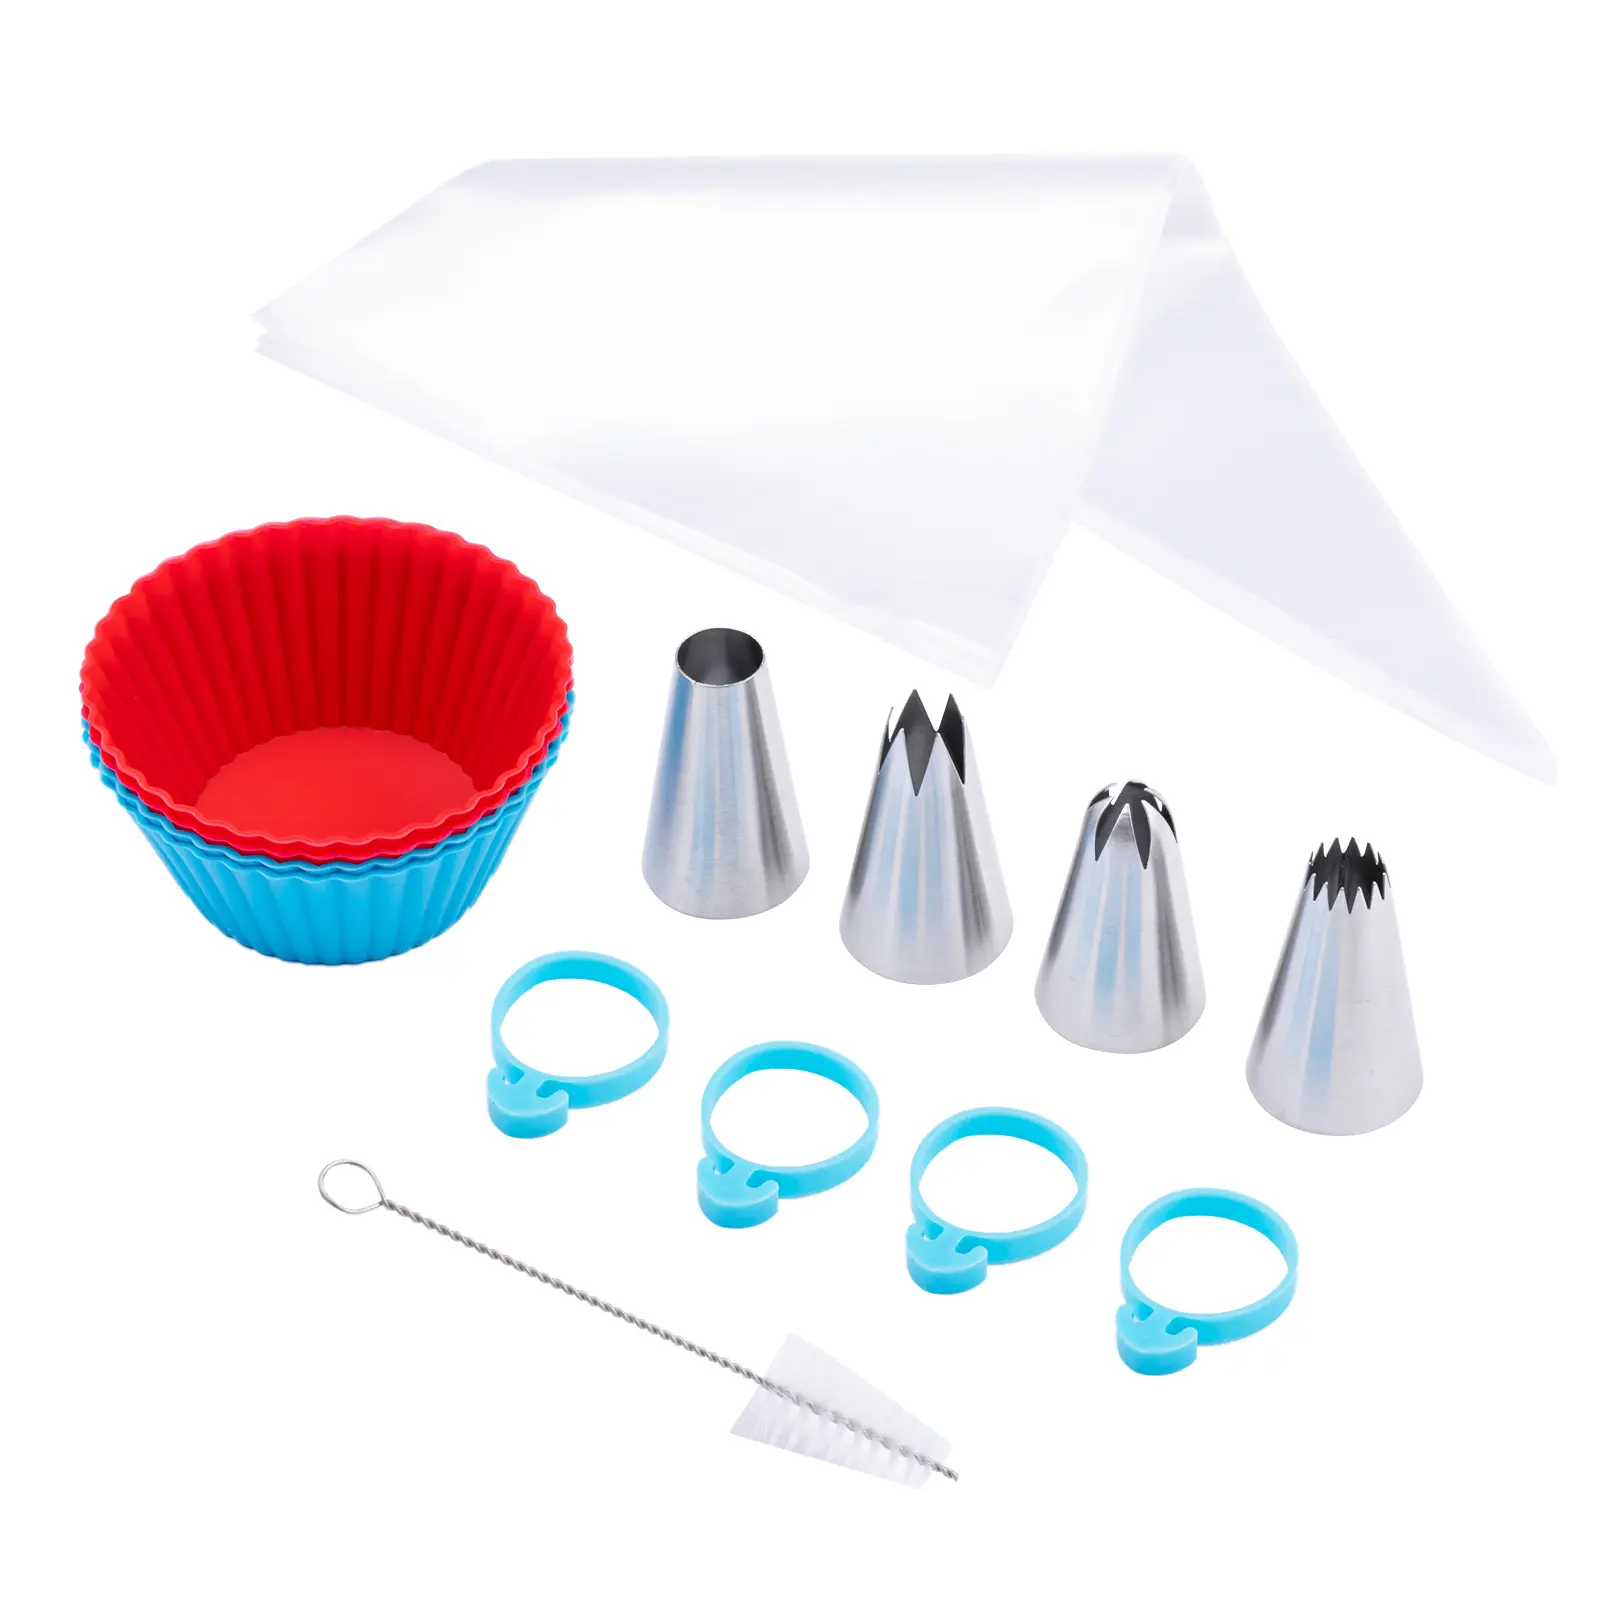 21pcs Stainless Steel Piping Tips And Disposable PE Pastry Bag Set Baking Cake Decorating Accessories